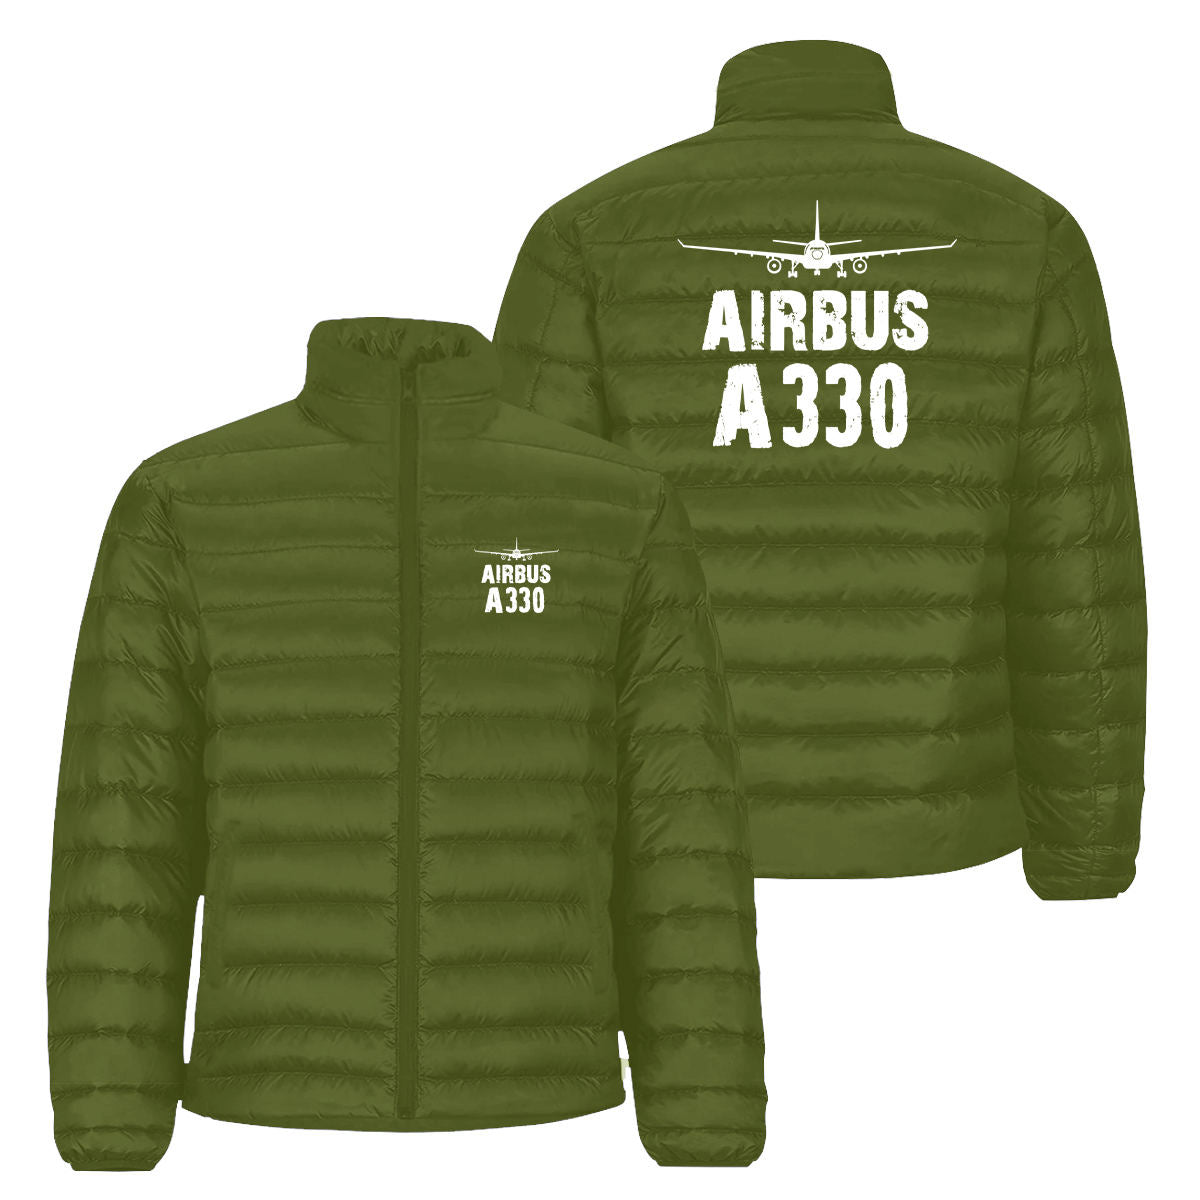 Airbus A330 & Plane Designed Padded Jackets